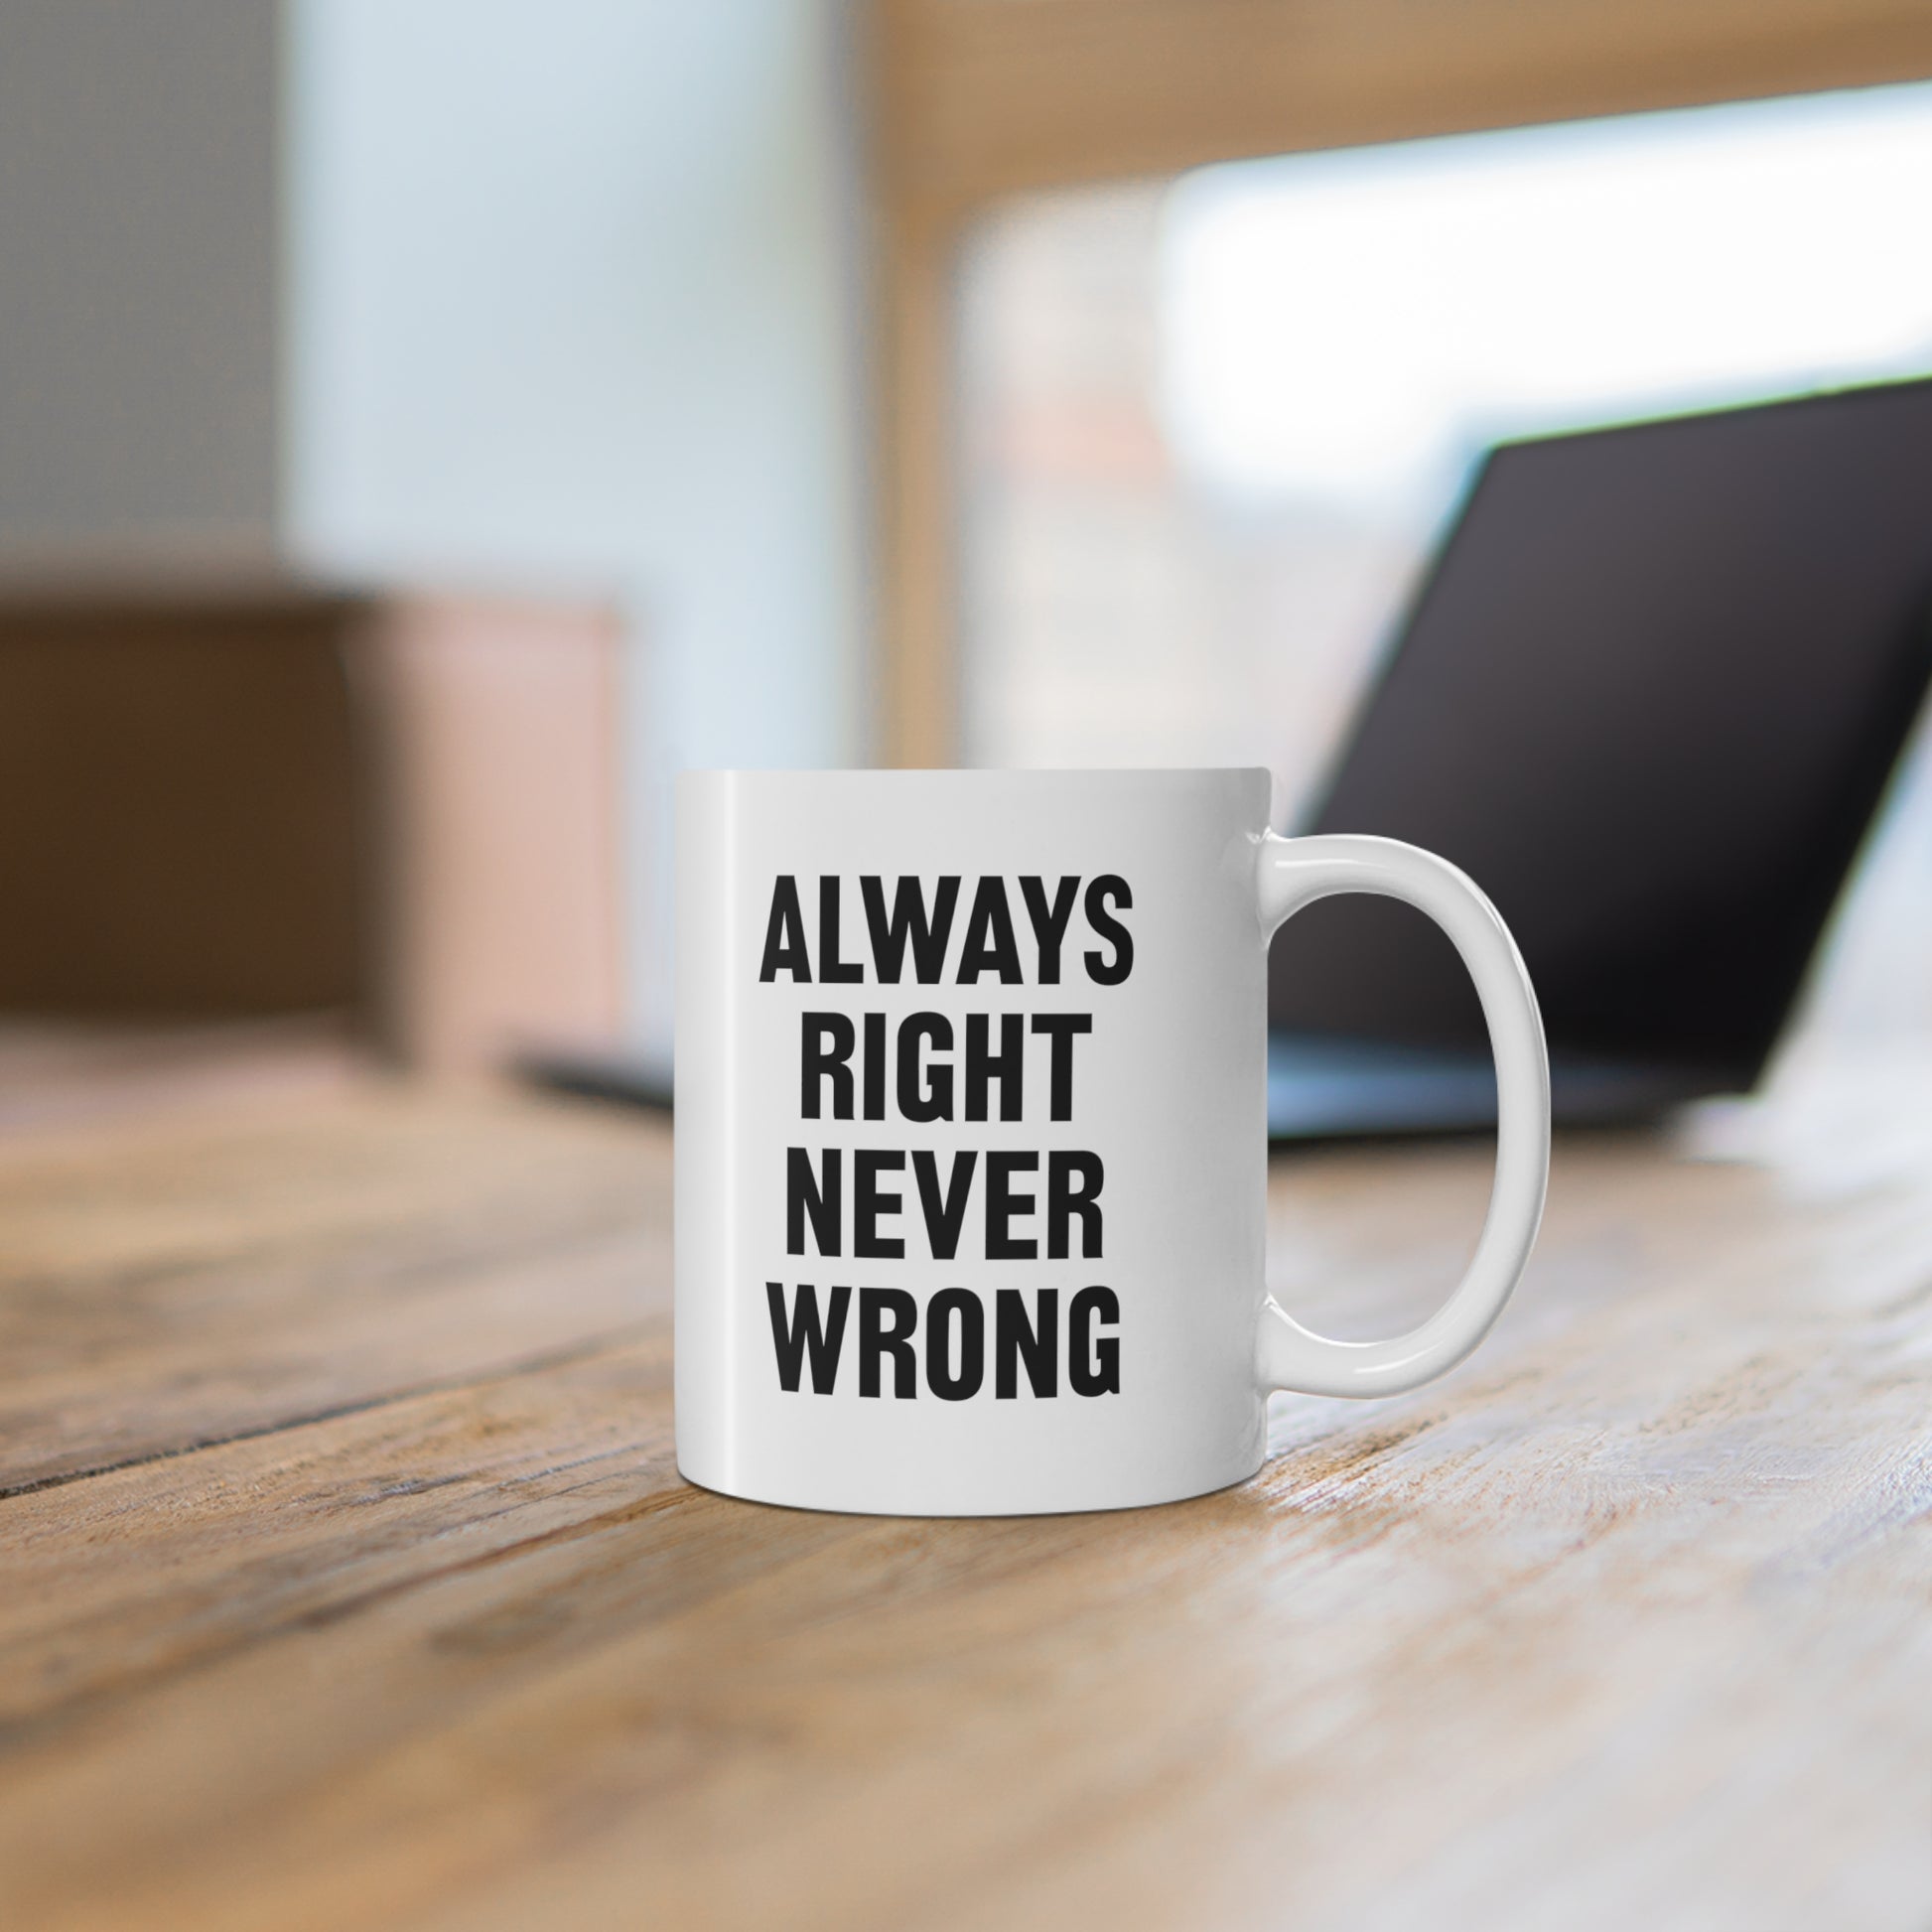 11oz ceramic mug with quote Always Right Never Wrong